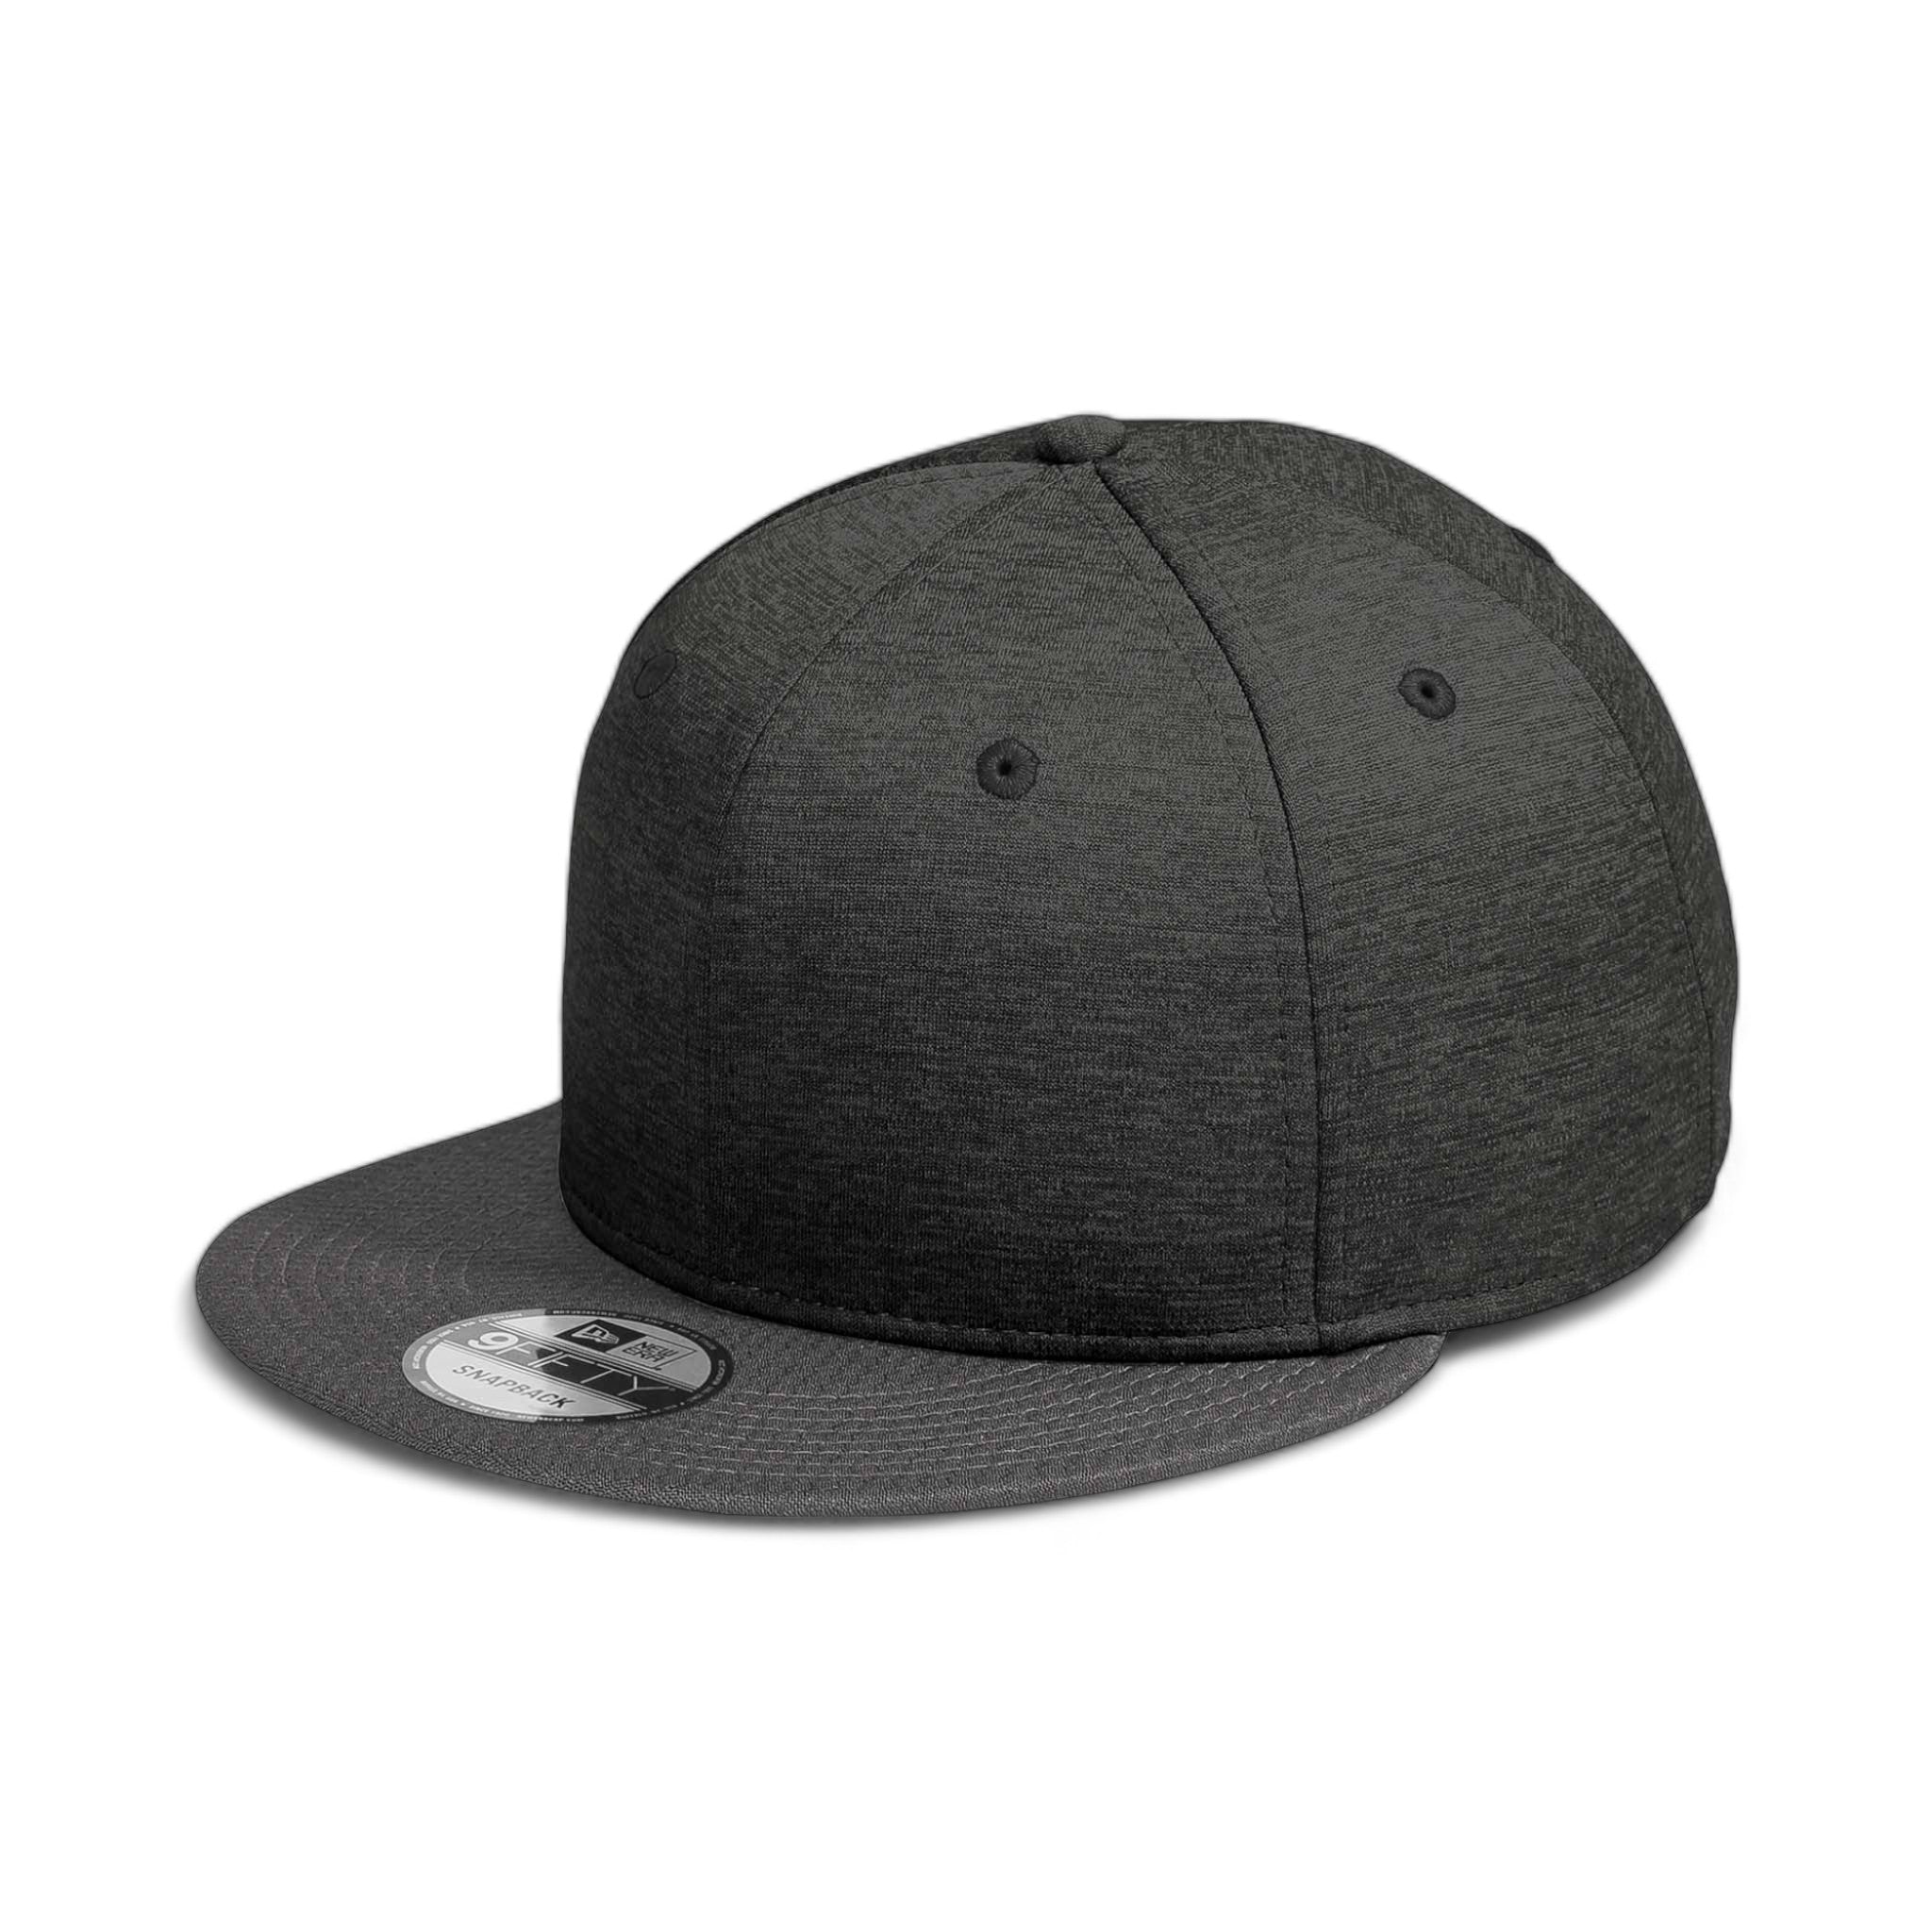 Side view of New Era NE408 custom hat in black shadow heather and graphite